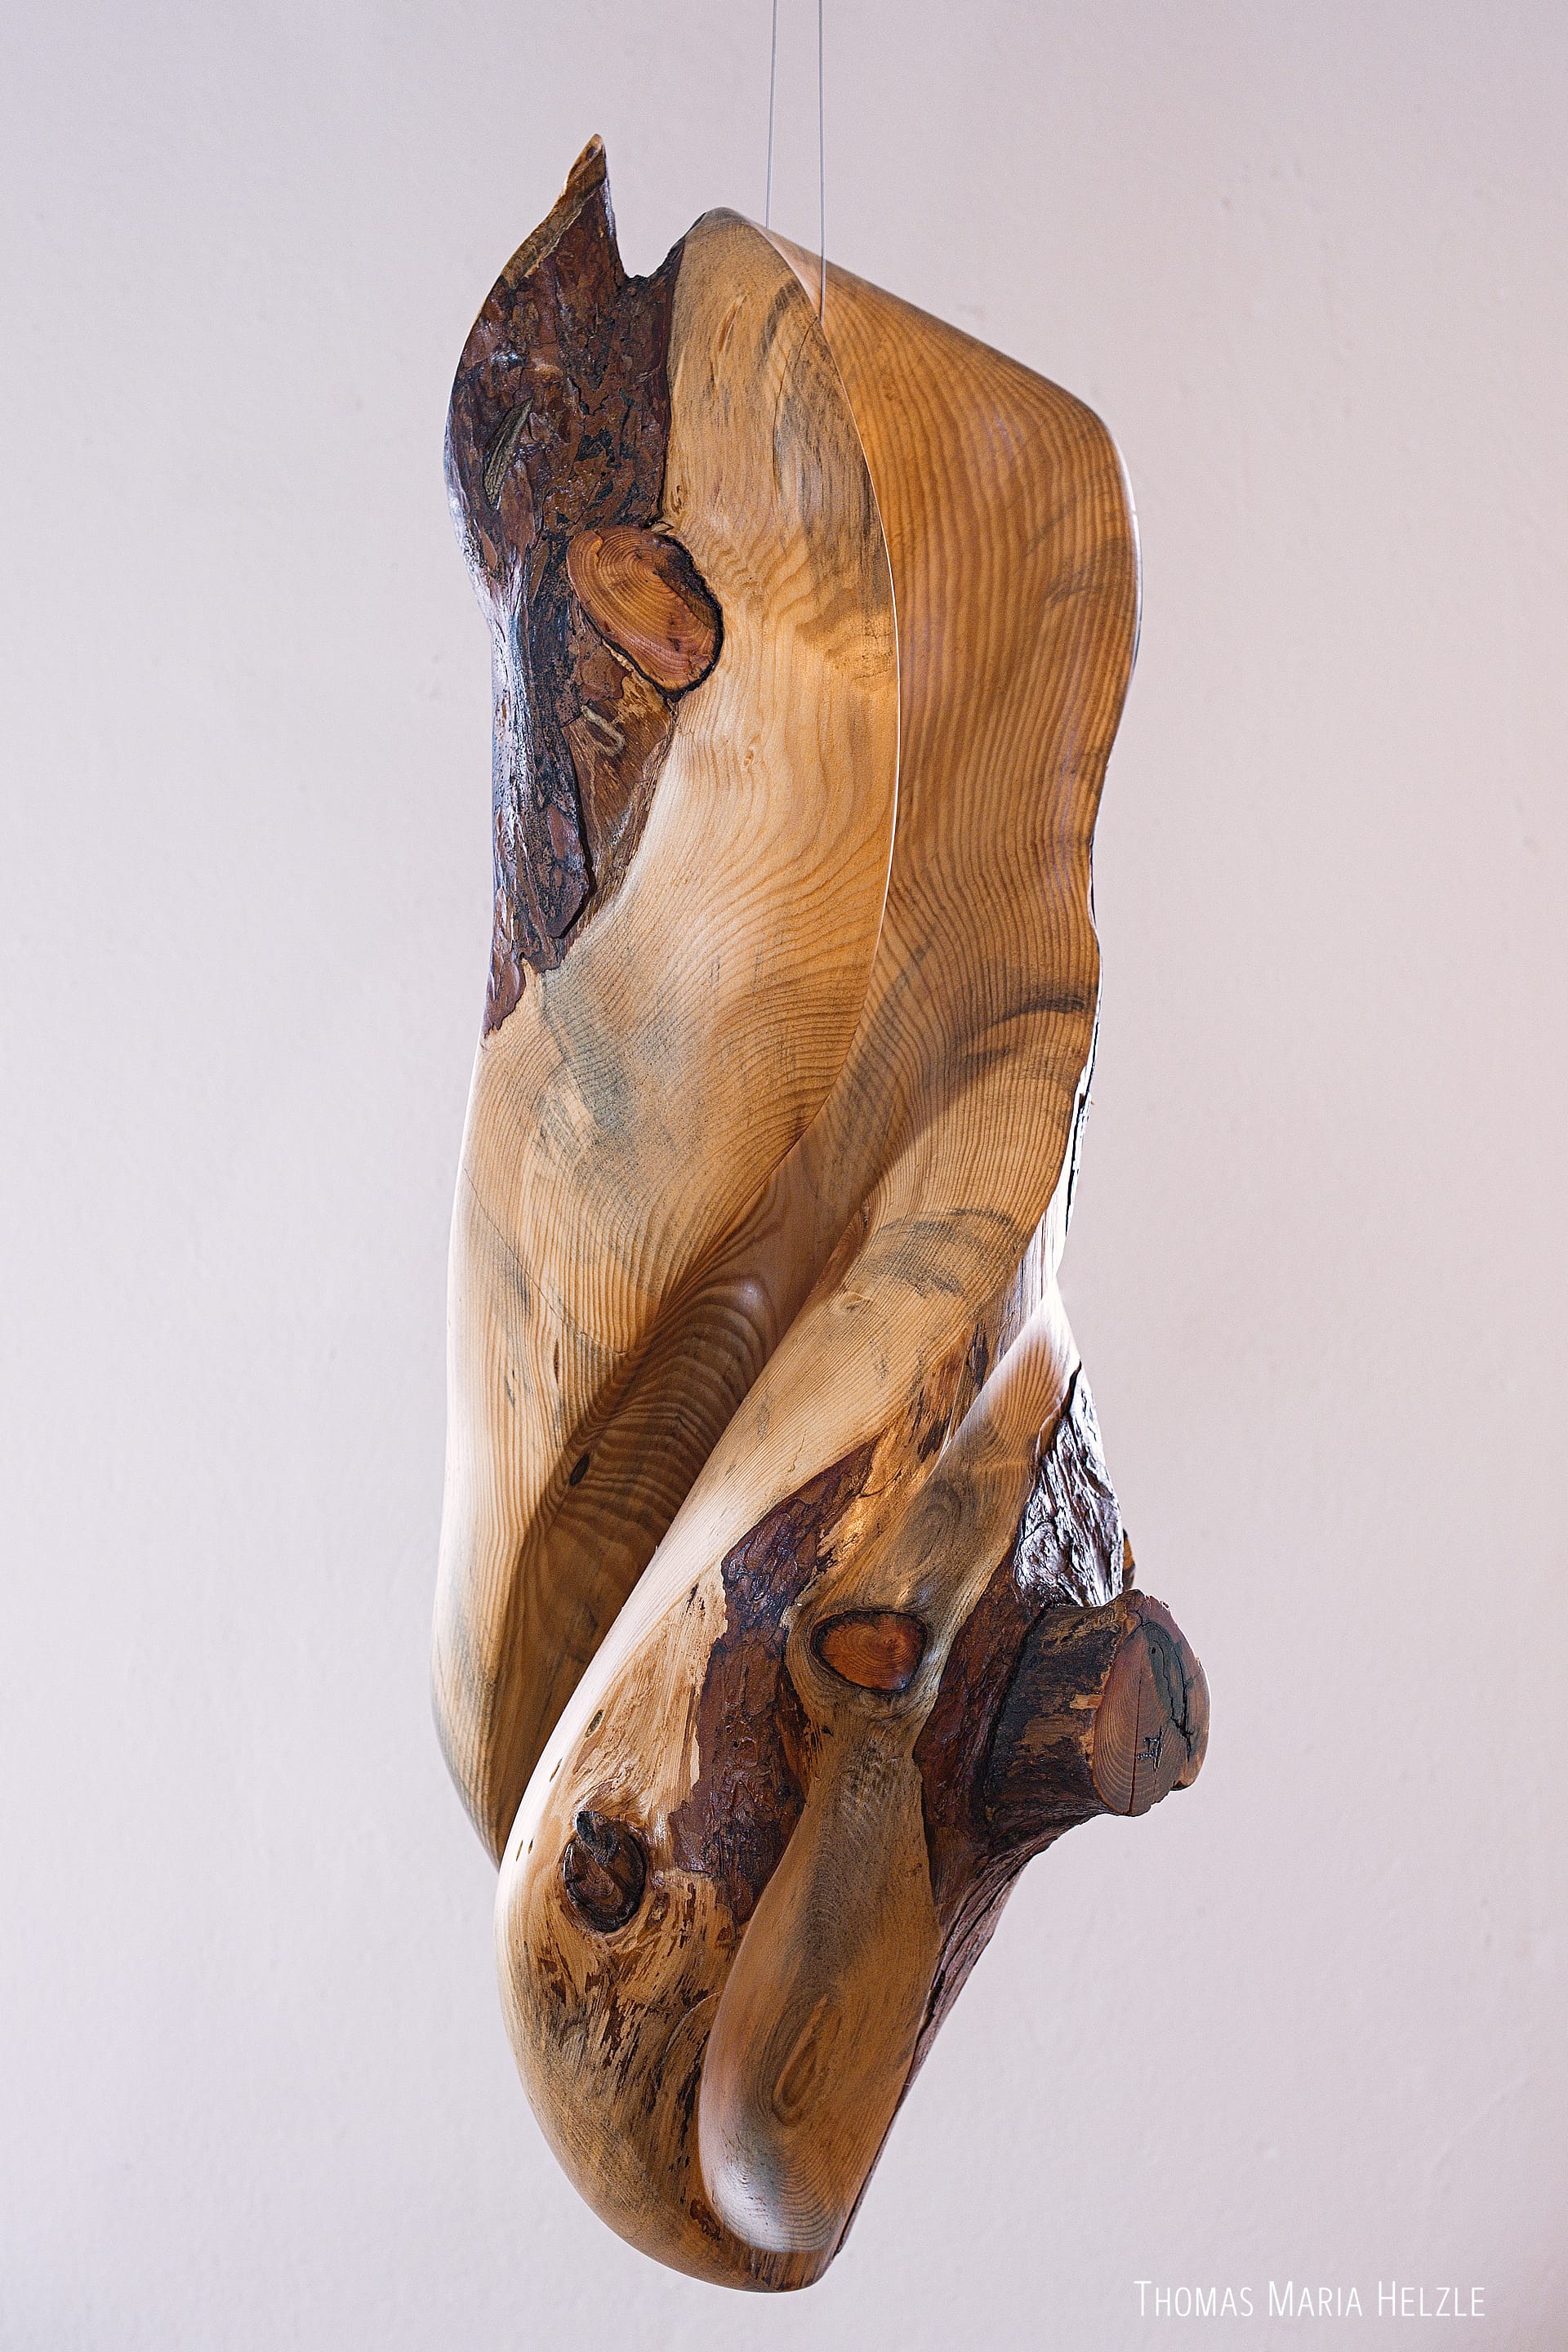 Full view of the Transitions sculpture, hanging from the ceiling. Pine wood with partially remaining bark in front of at white wall. This gallery shows different angles of the very smooth and organic, flowing forms.